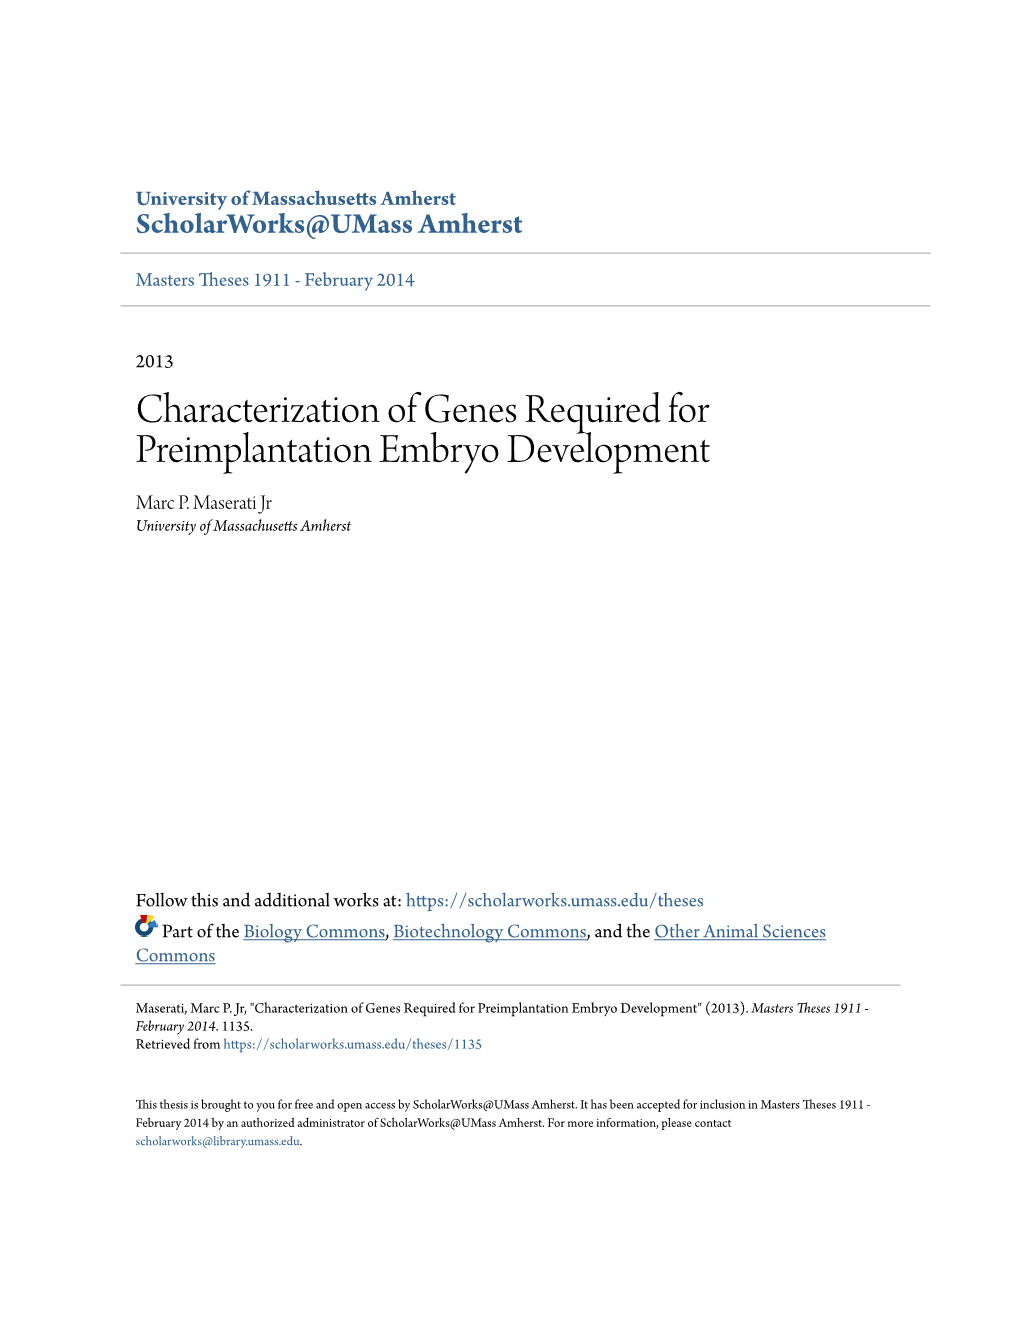 Characterization of Genes Required for Preimplantation Embryo Development Marc P